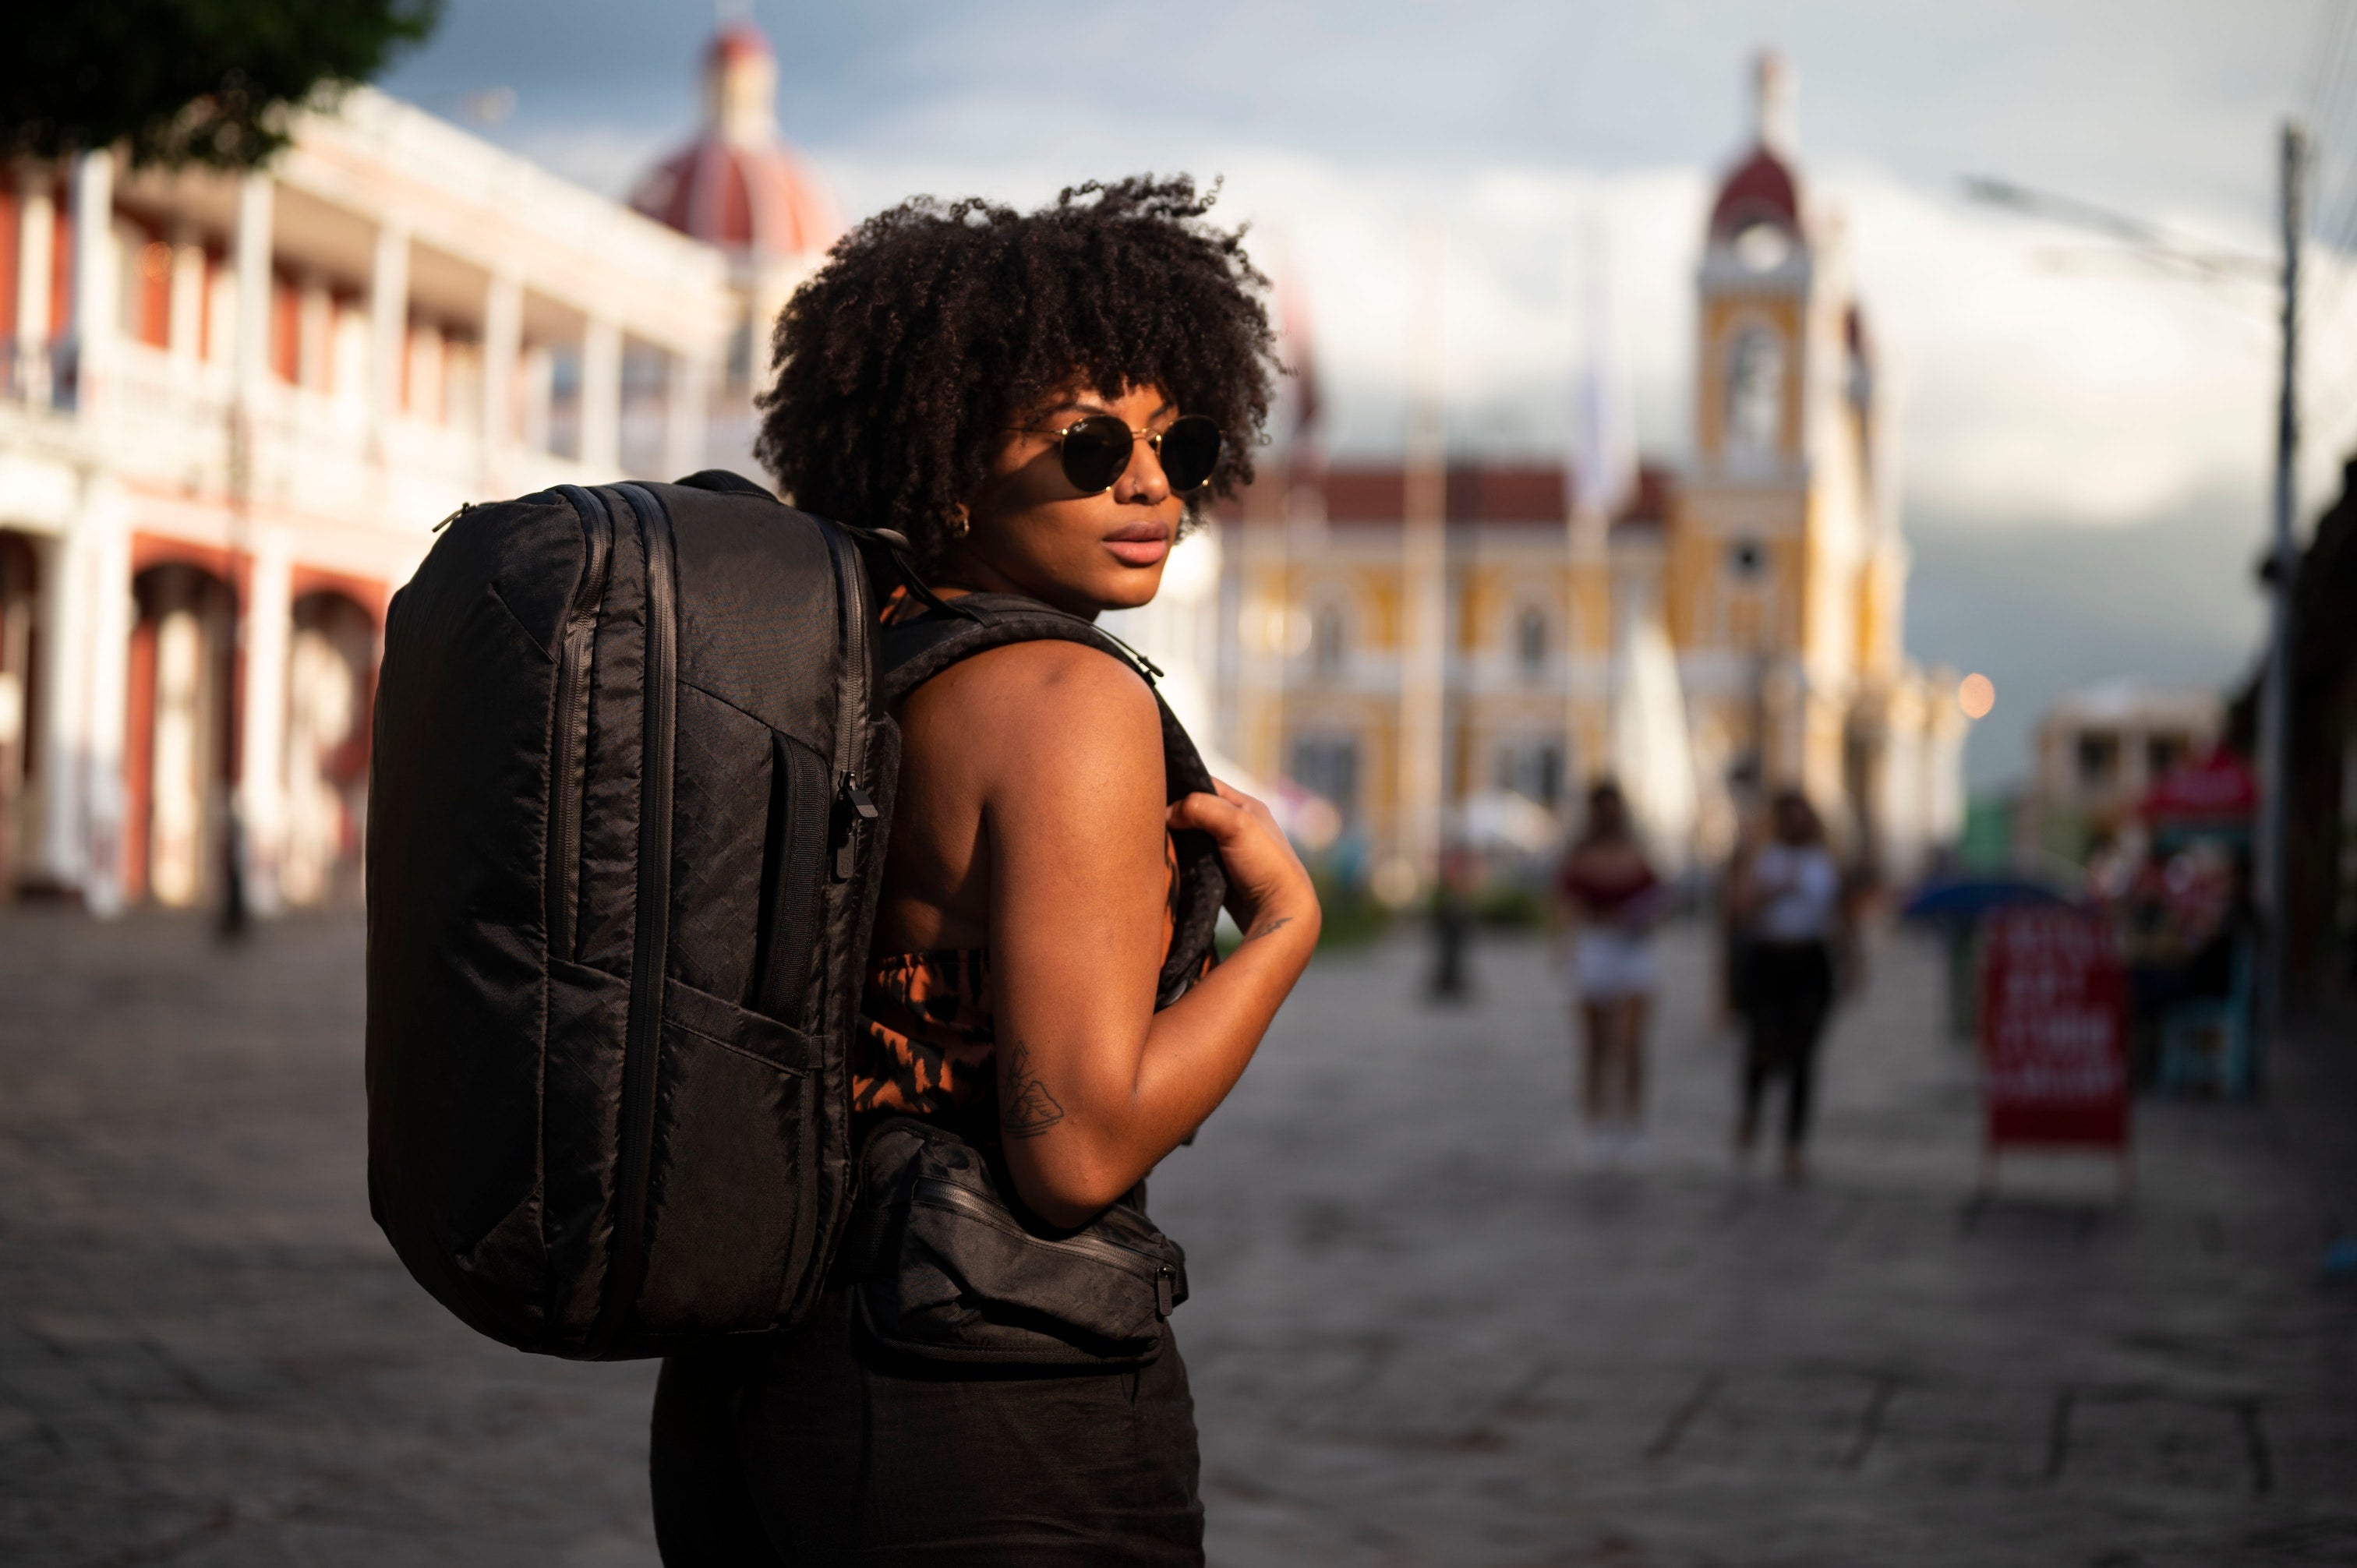 Tortuga: Travel Backpacks, Personal Items, & Travel Accessories